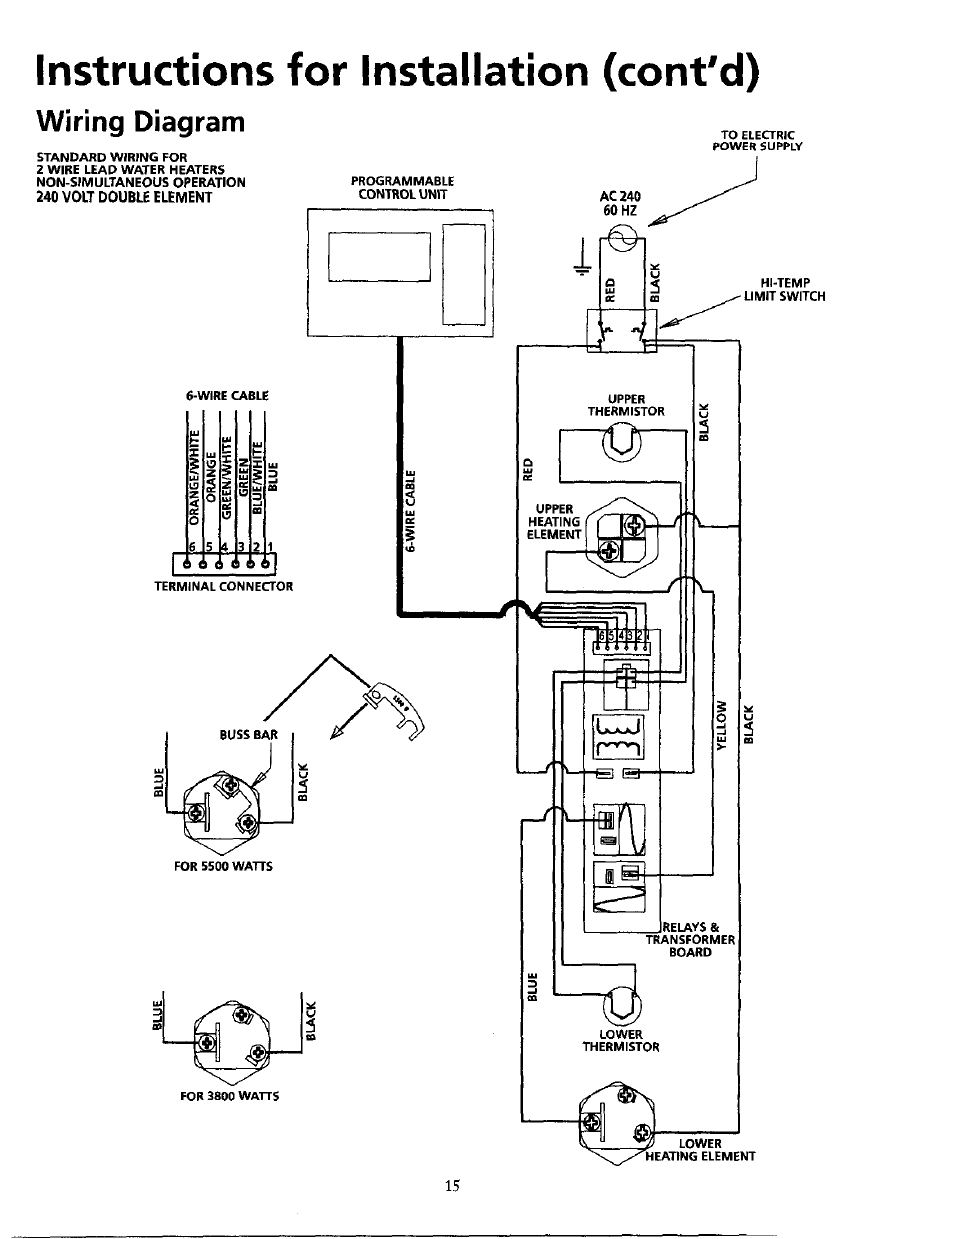 Instructions for installation (cont'd), Wiring diagram | Maytag HE21250PC User Manual | Page 15 / 40